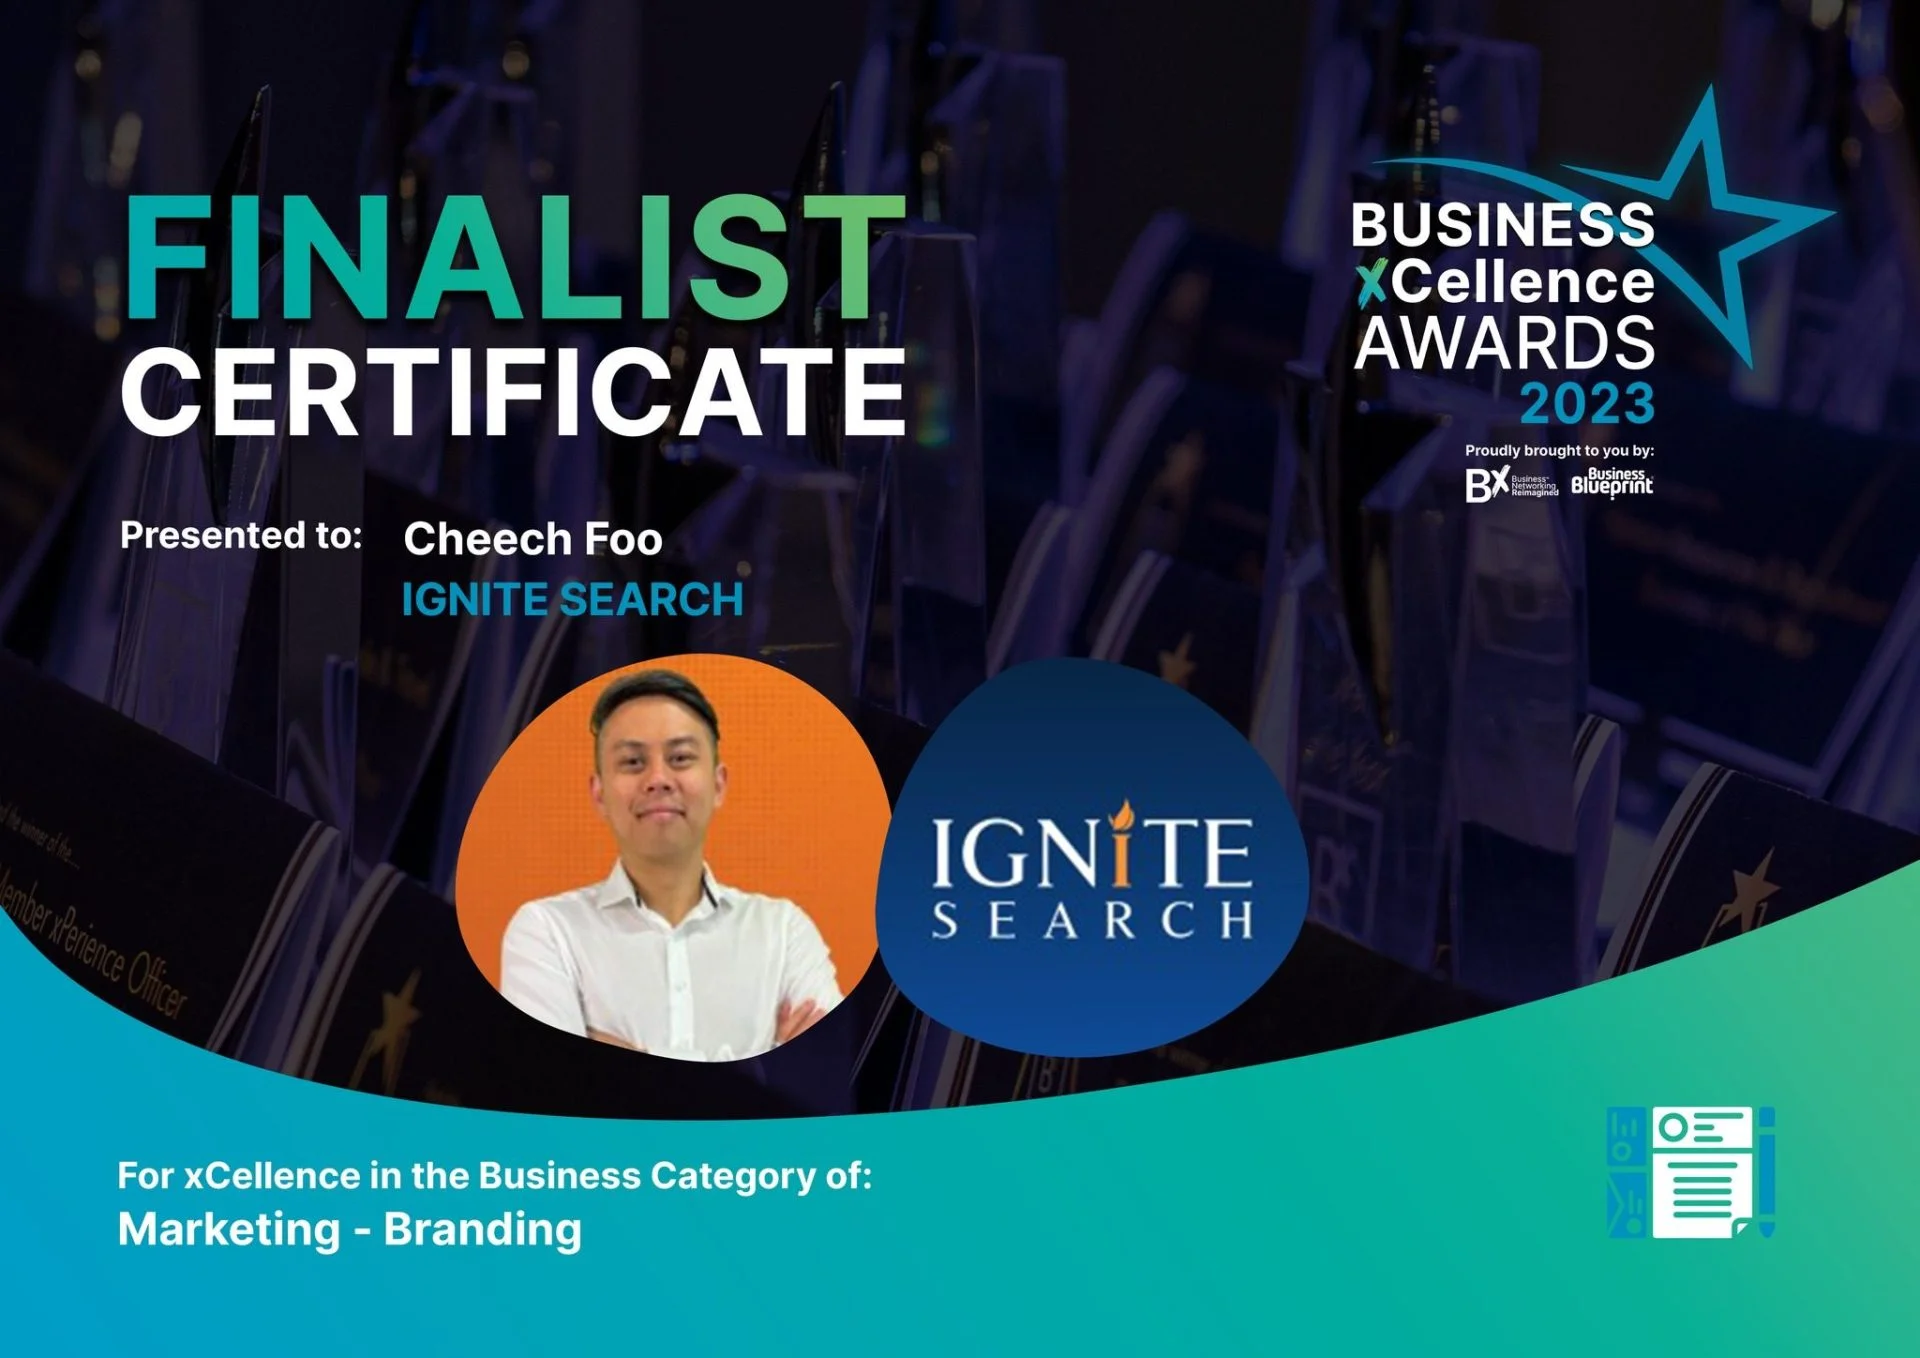 Ignite Search is a Business XCellence AWARDS 2023 Finalist!